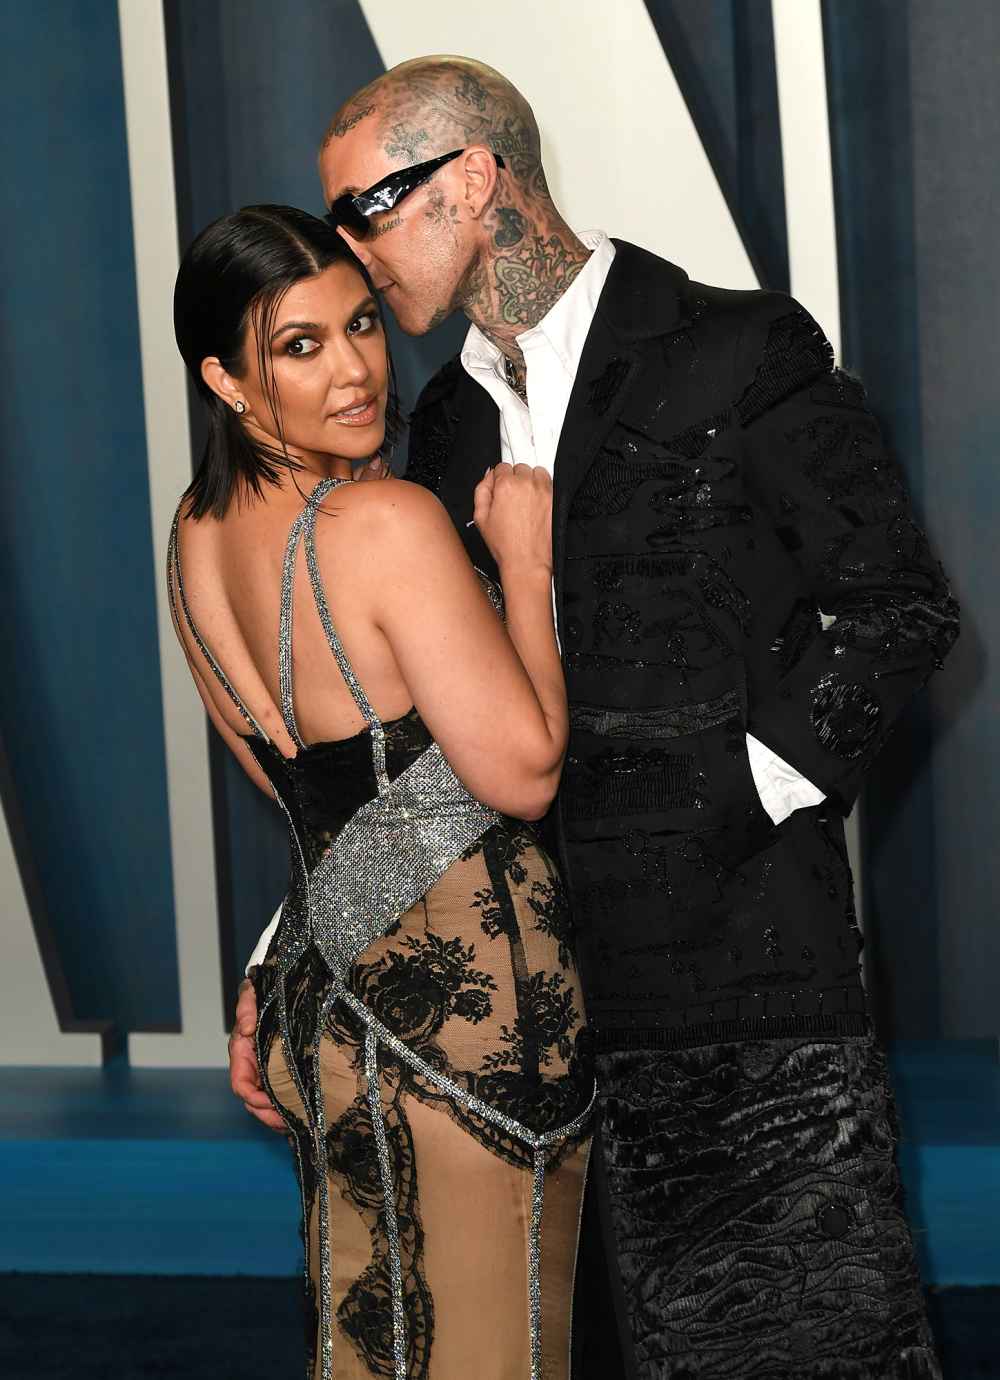 Kourtney Kardashian Is a Proud ‘Tour Wife’ in Backstage PDA Pics With Travis Barker During Machine Gun Kelly’s Concerts